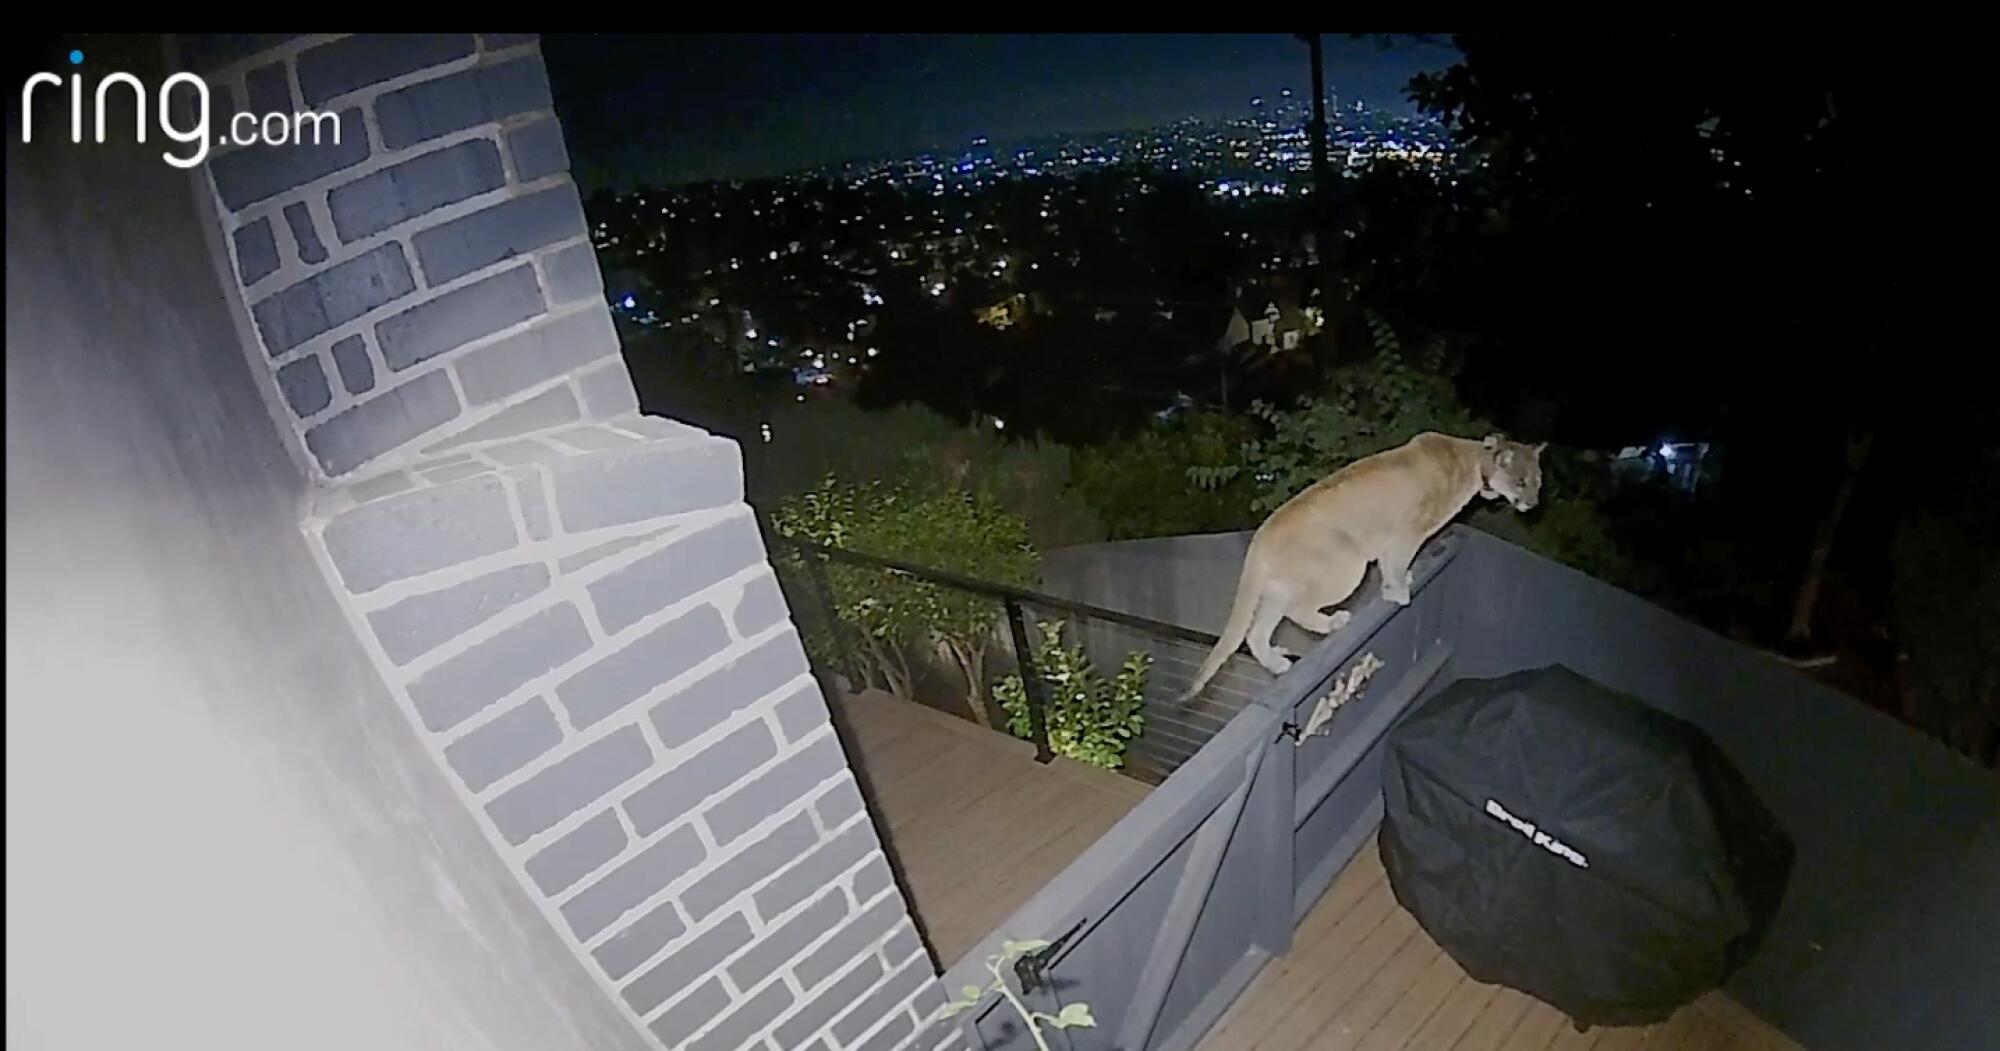 A mountain lion walking along a fence next to a home, with city lights in the background